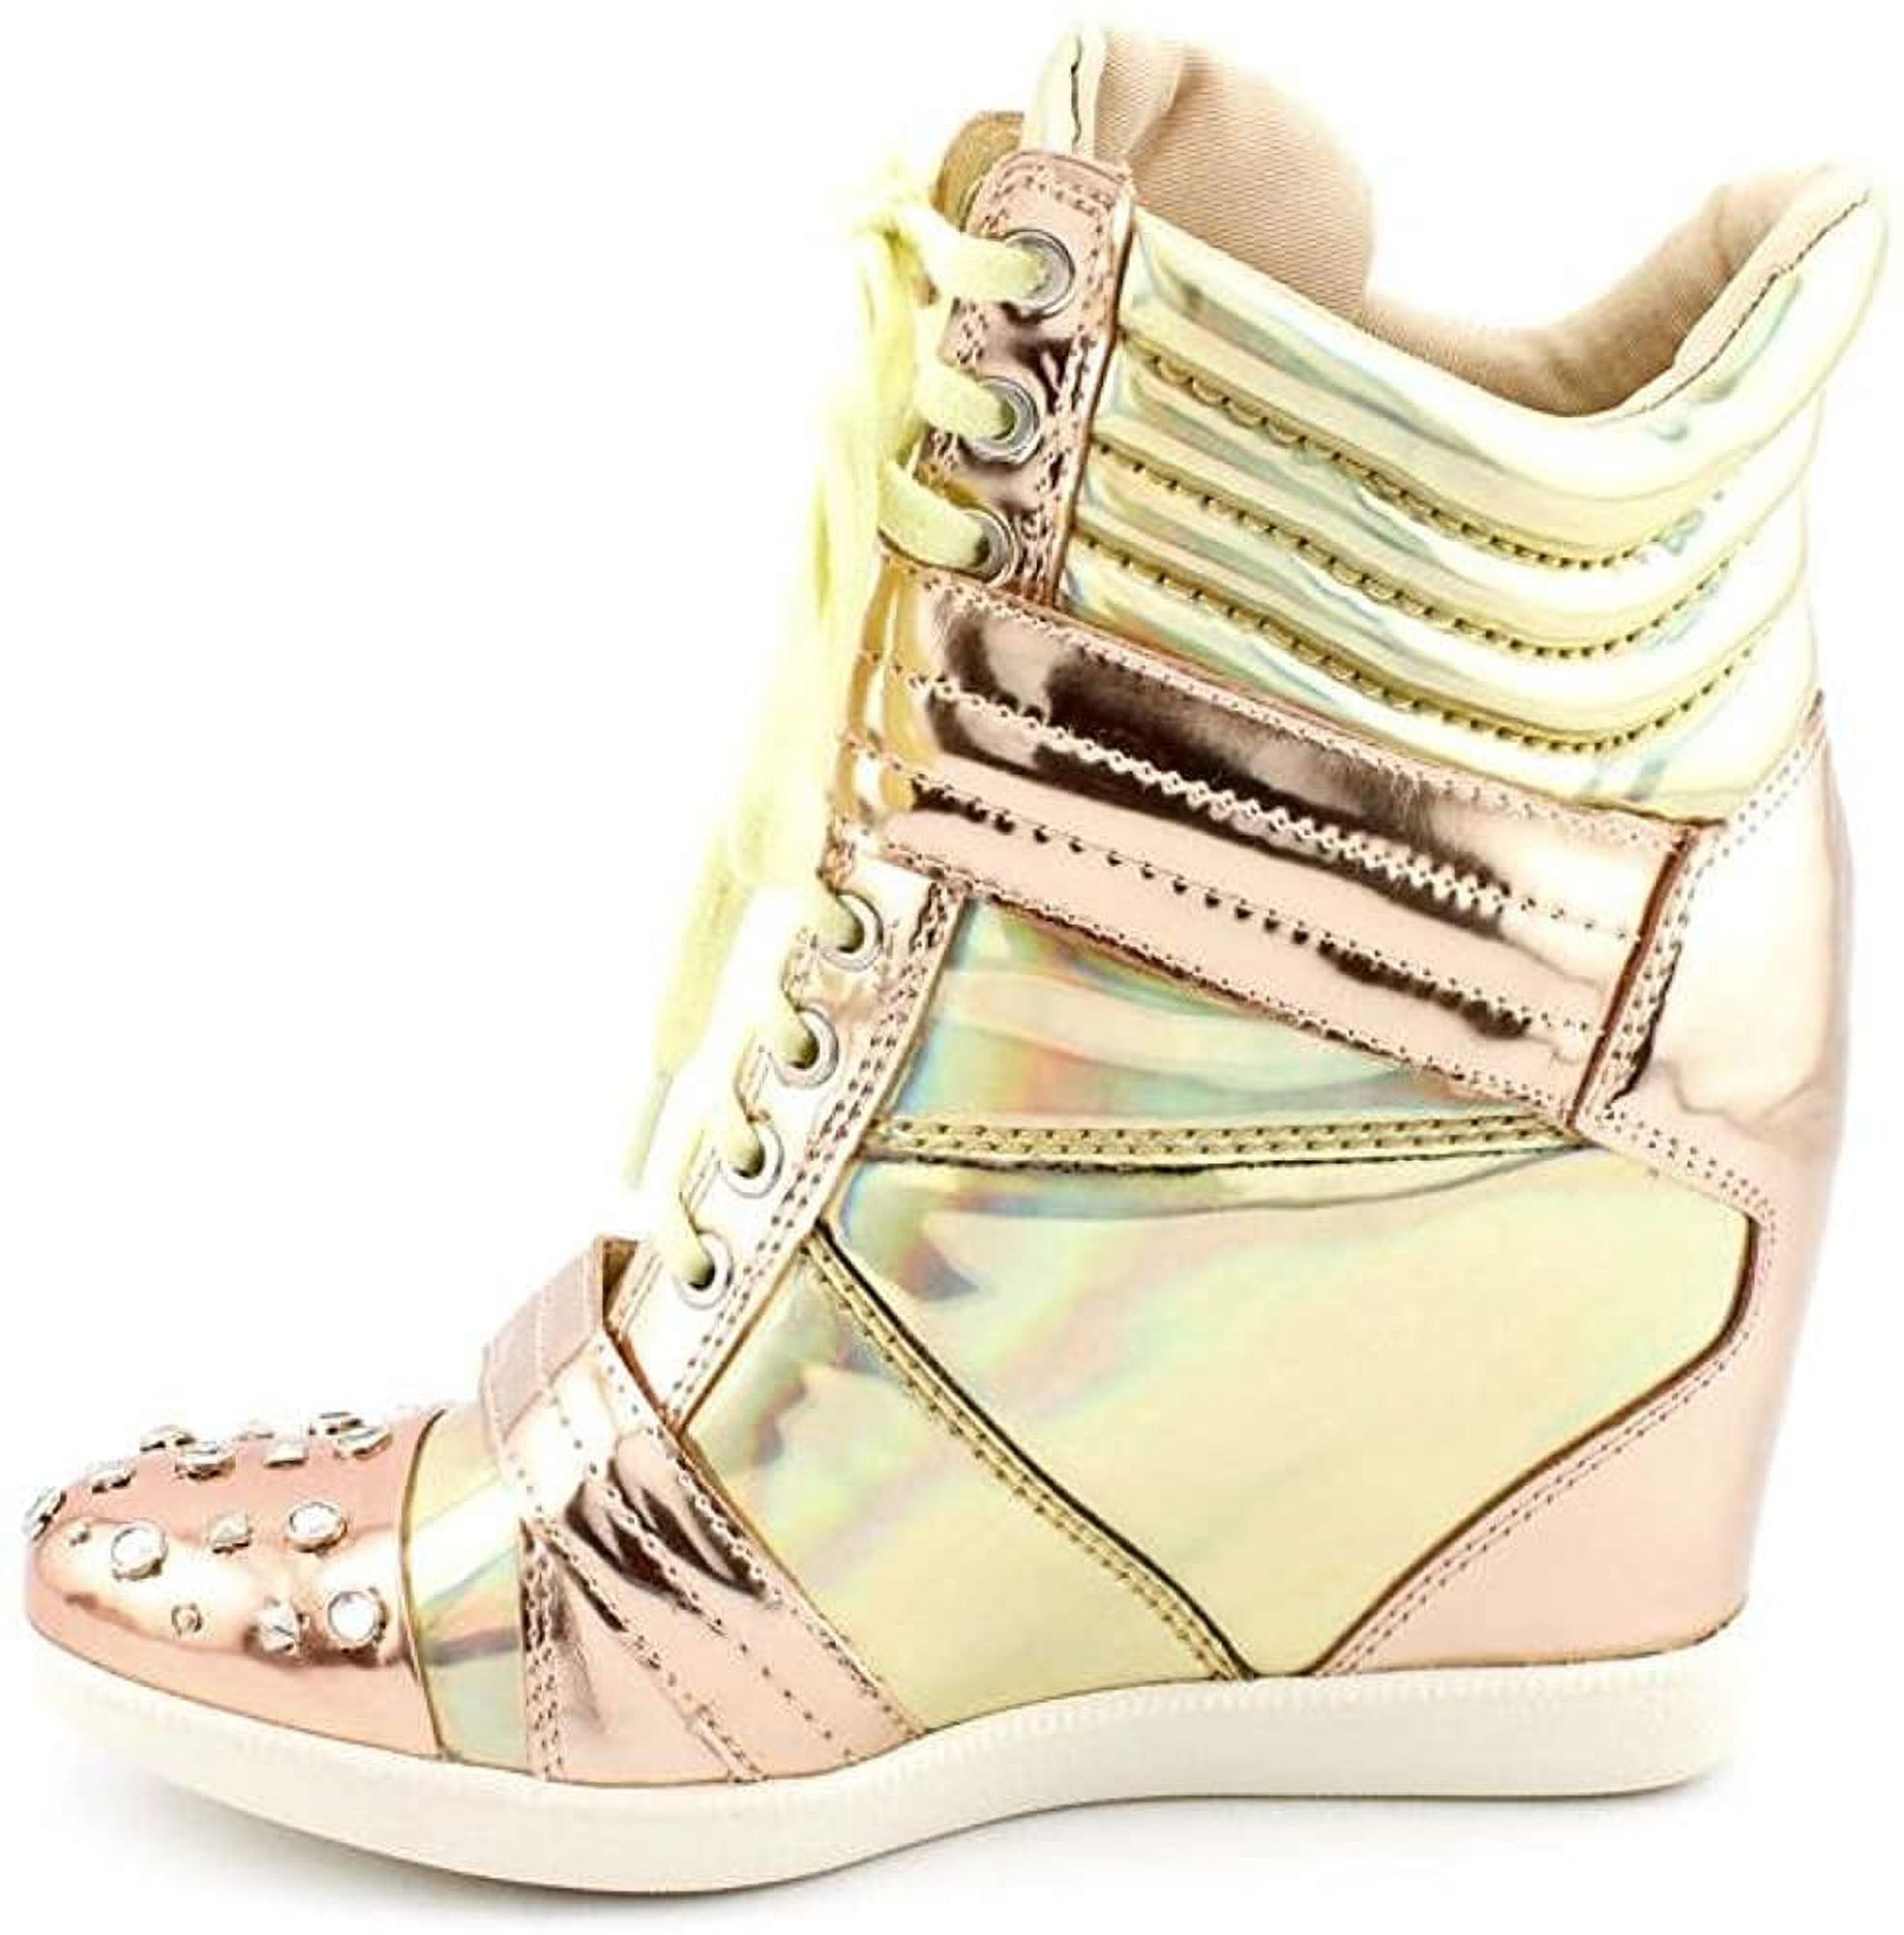 Boutique 9 Nevan 1 Women's Fashion Lace Up Wedge Sneakers Shoes - Gold - image 2 of 5